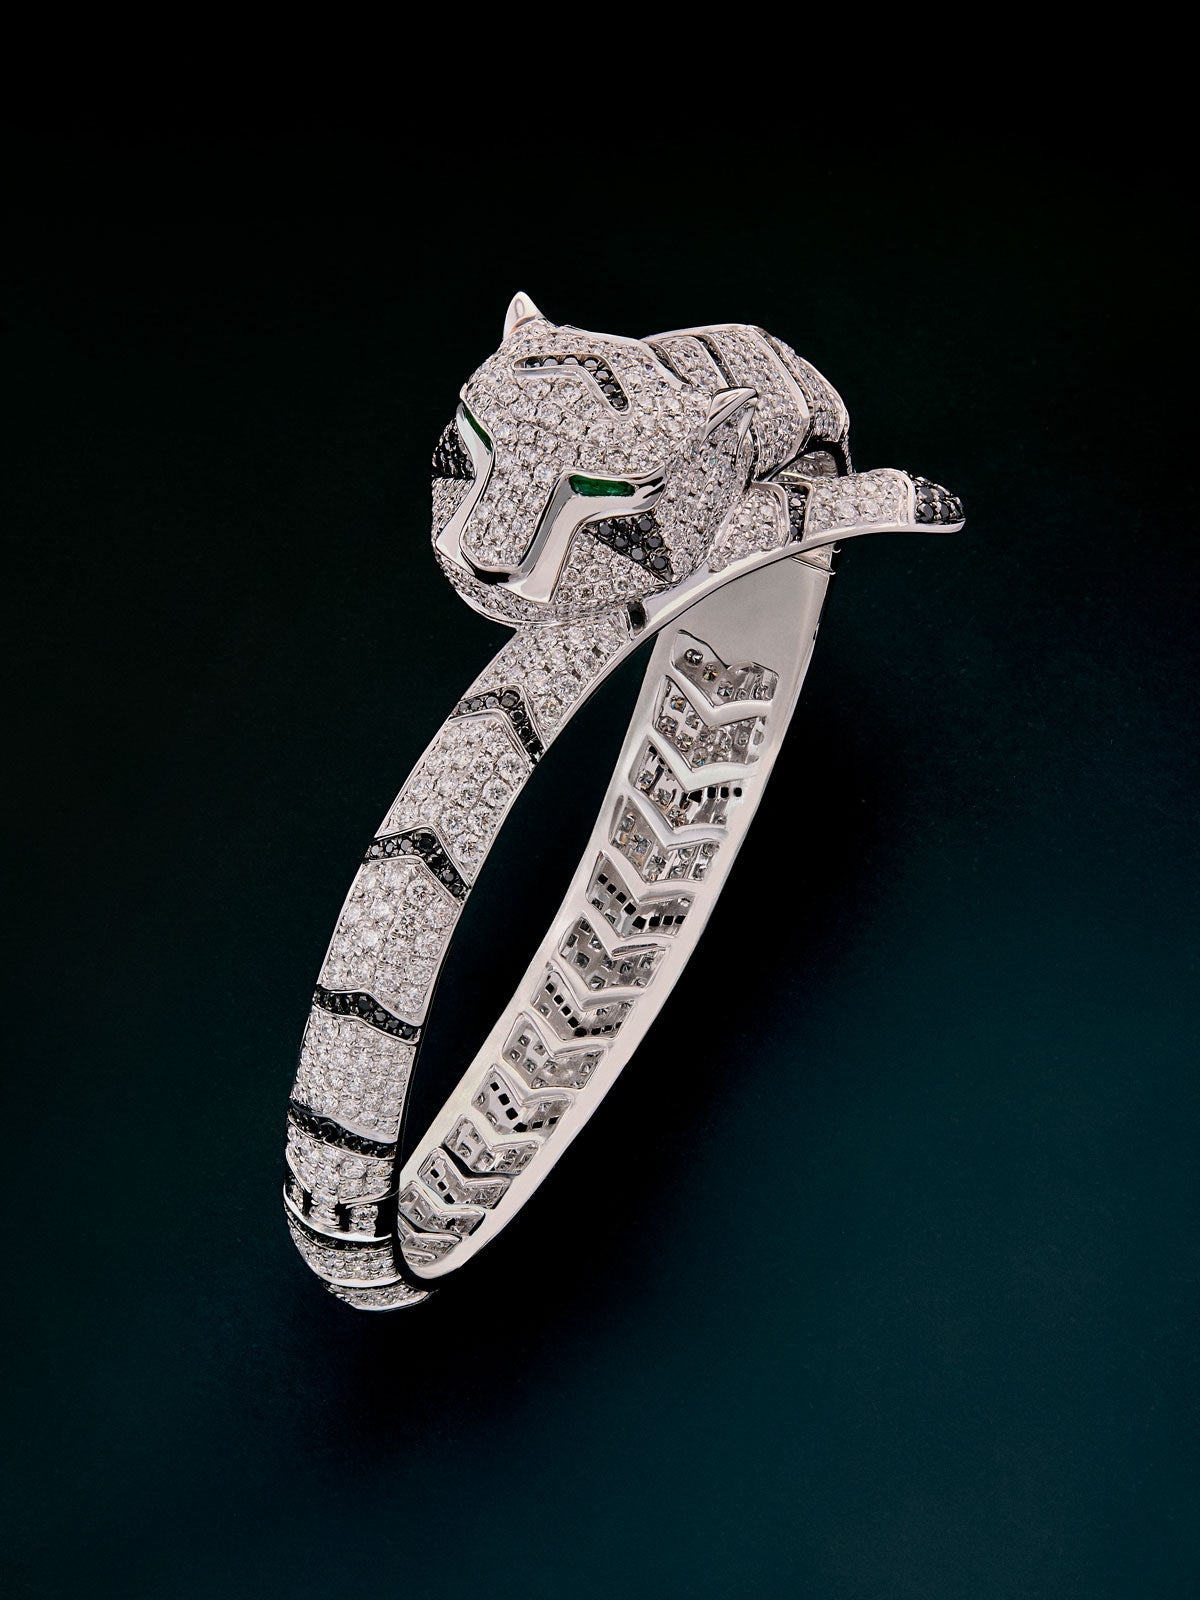 Rigid 18K white gold bracelet with brilliant-cut white diamonds of 8.17 cts and black diamonds of 1.49 cts, and trapezoid-cut emeralds of 0.13 cts in the shape of a tiger